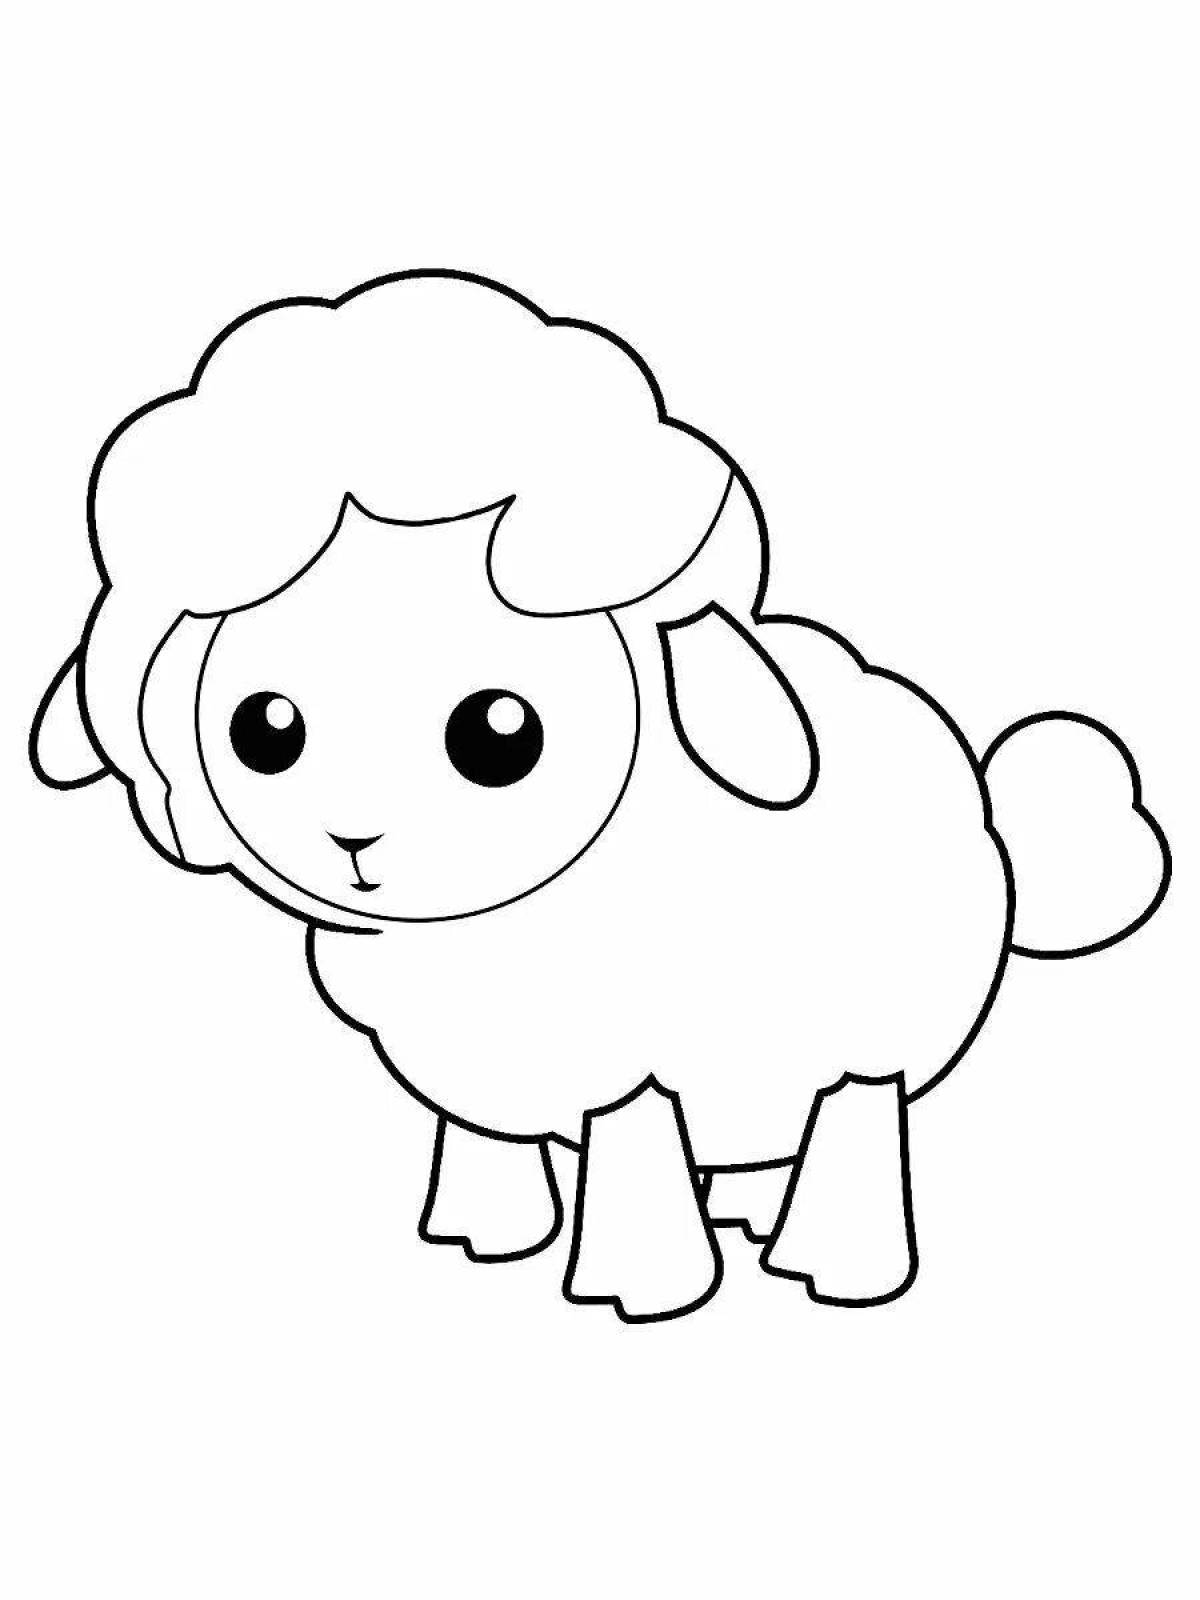 Sheep shining coloring book for children 3-4 years old